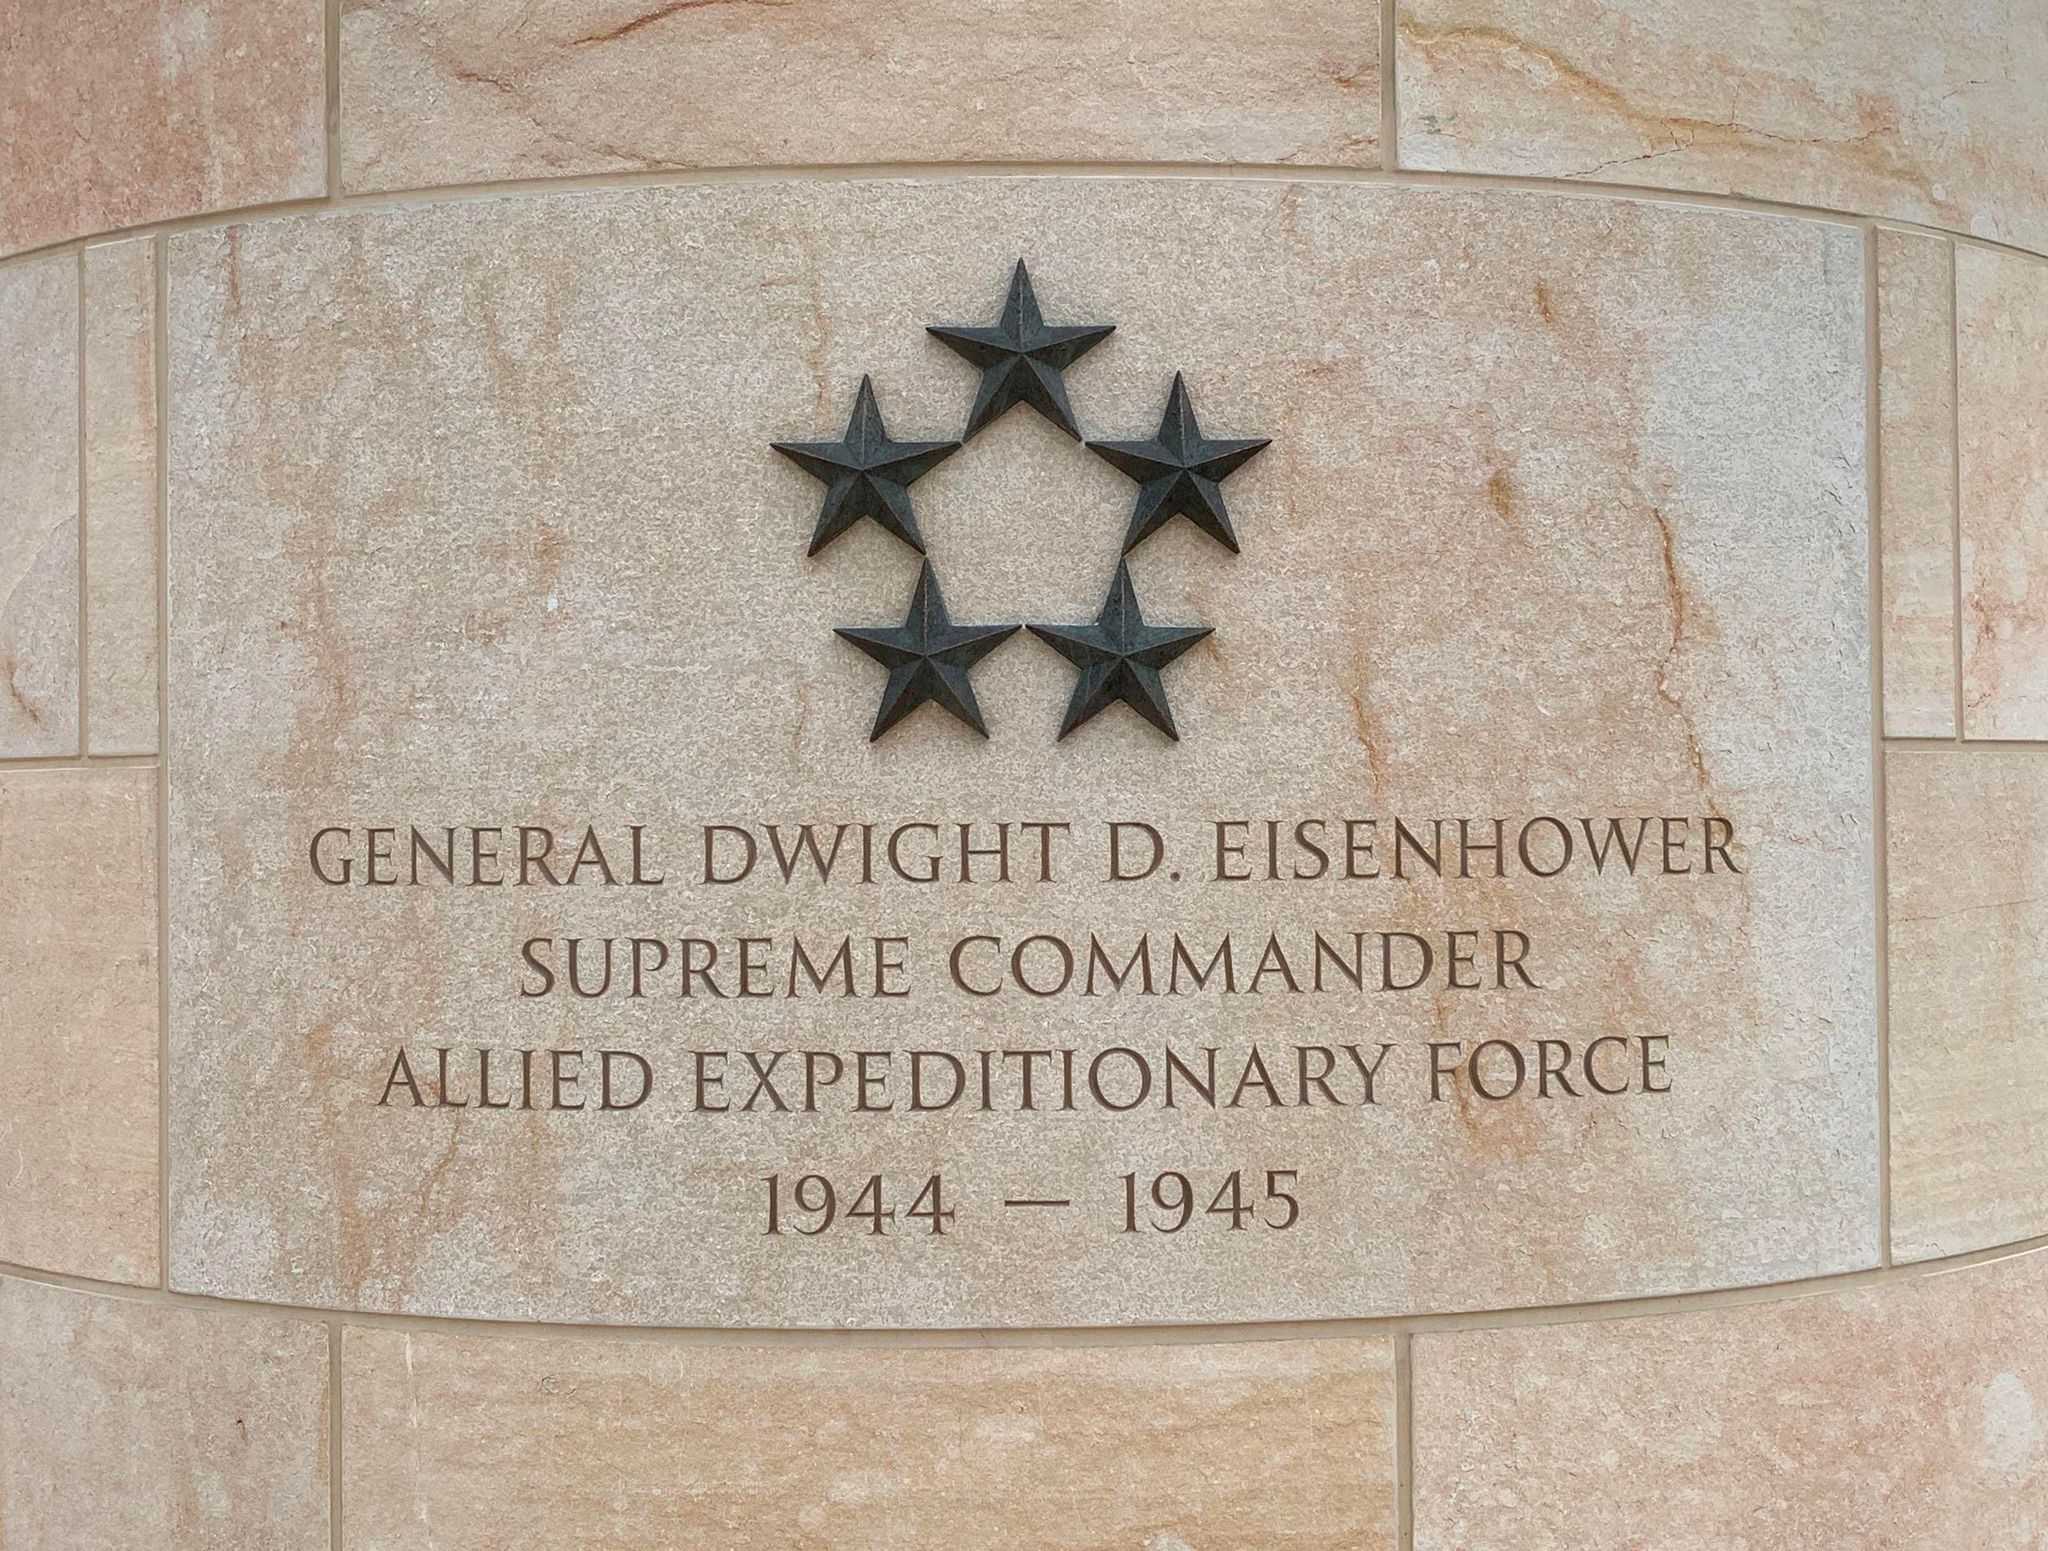 Entrance to the Dwight D. Eisenhower Memorial